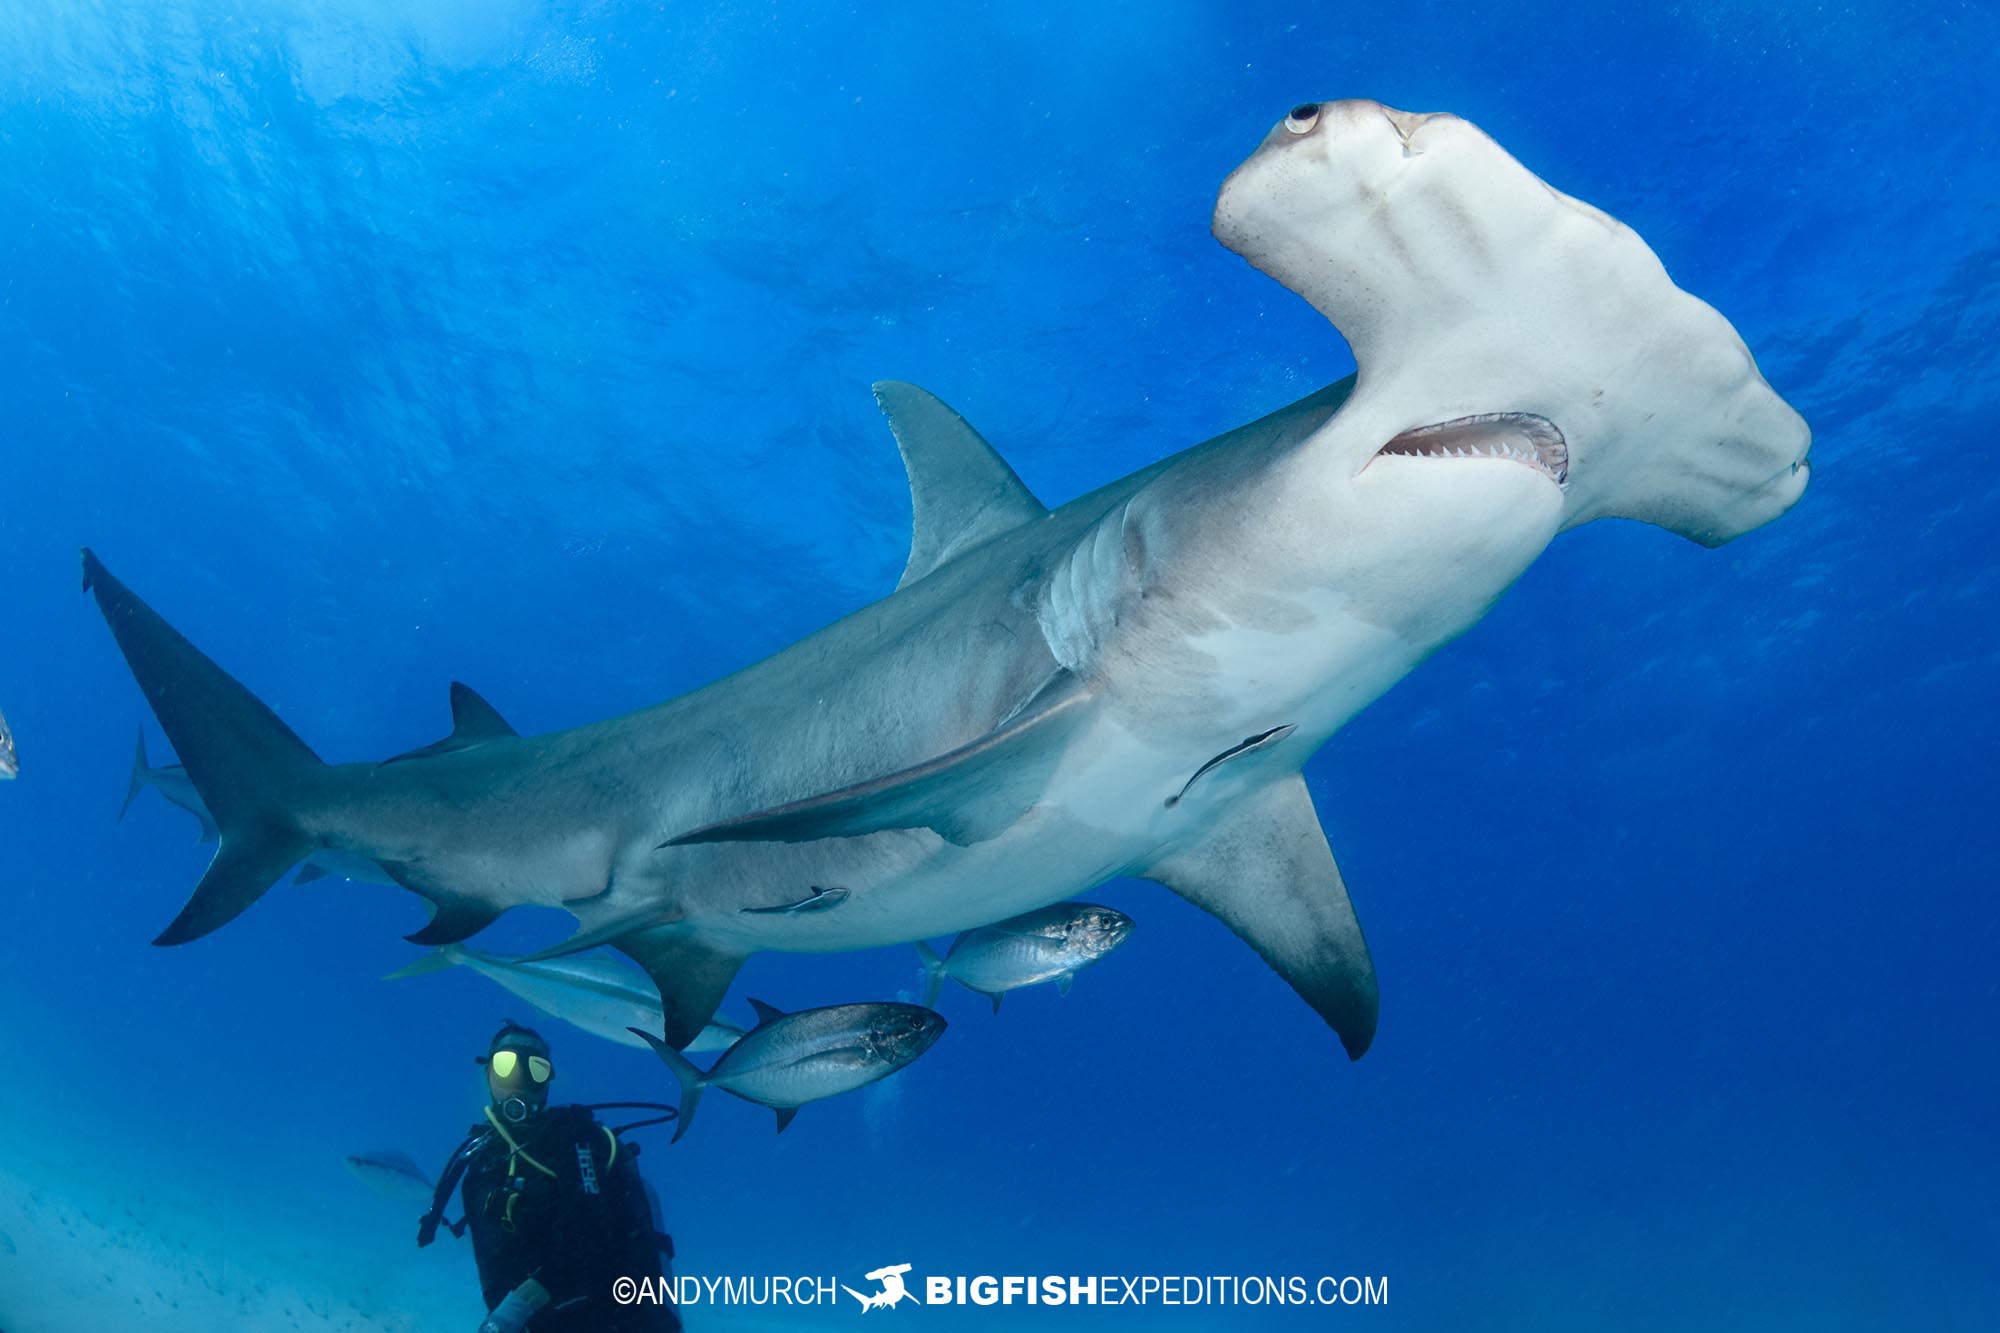 Diving with great hammerhead sharks in the bahamas